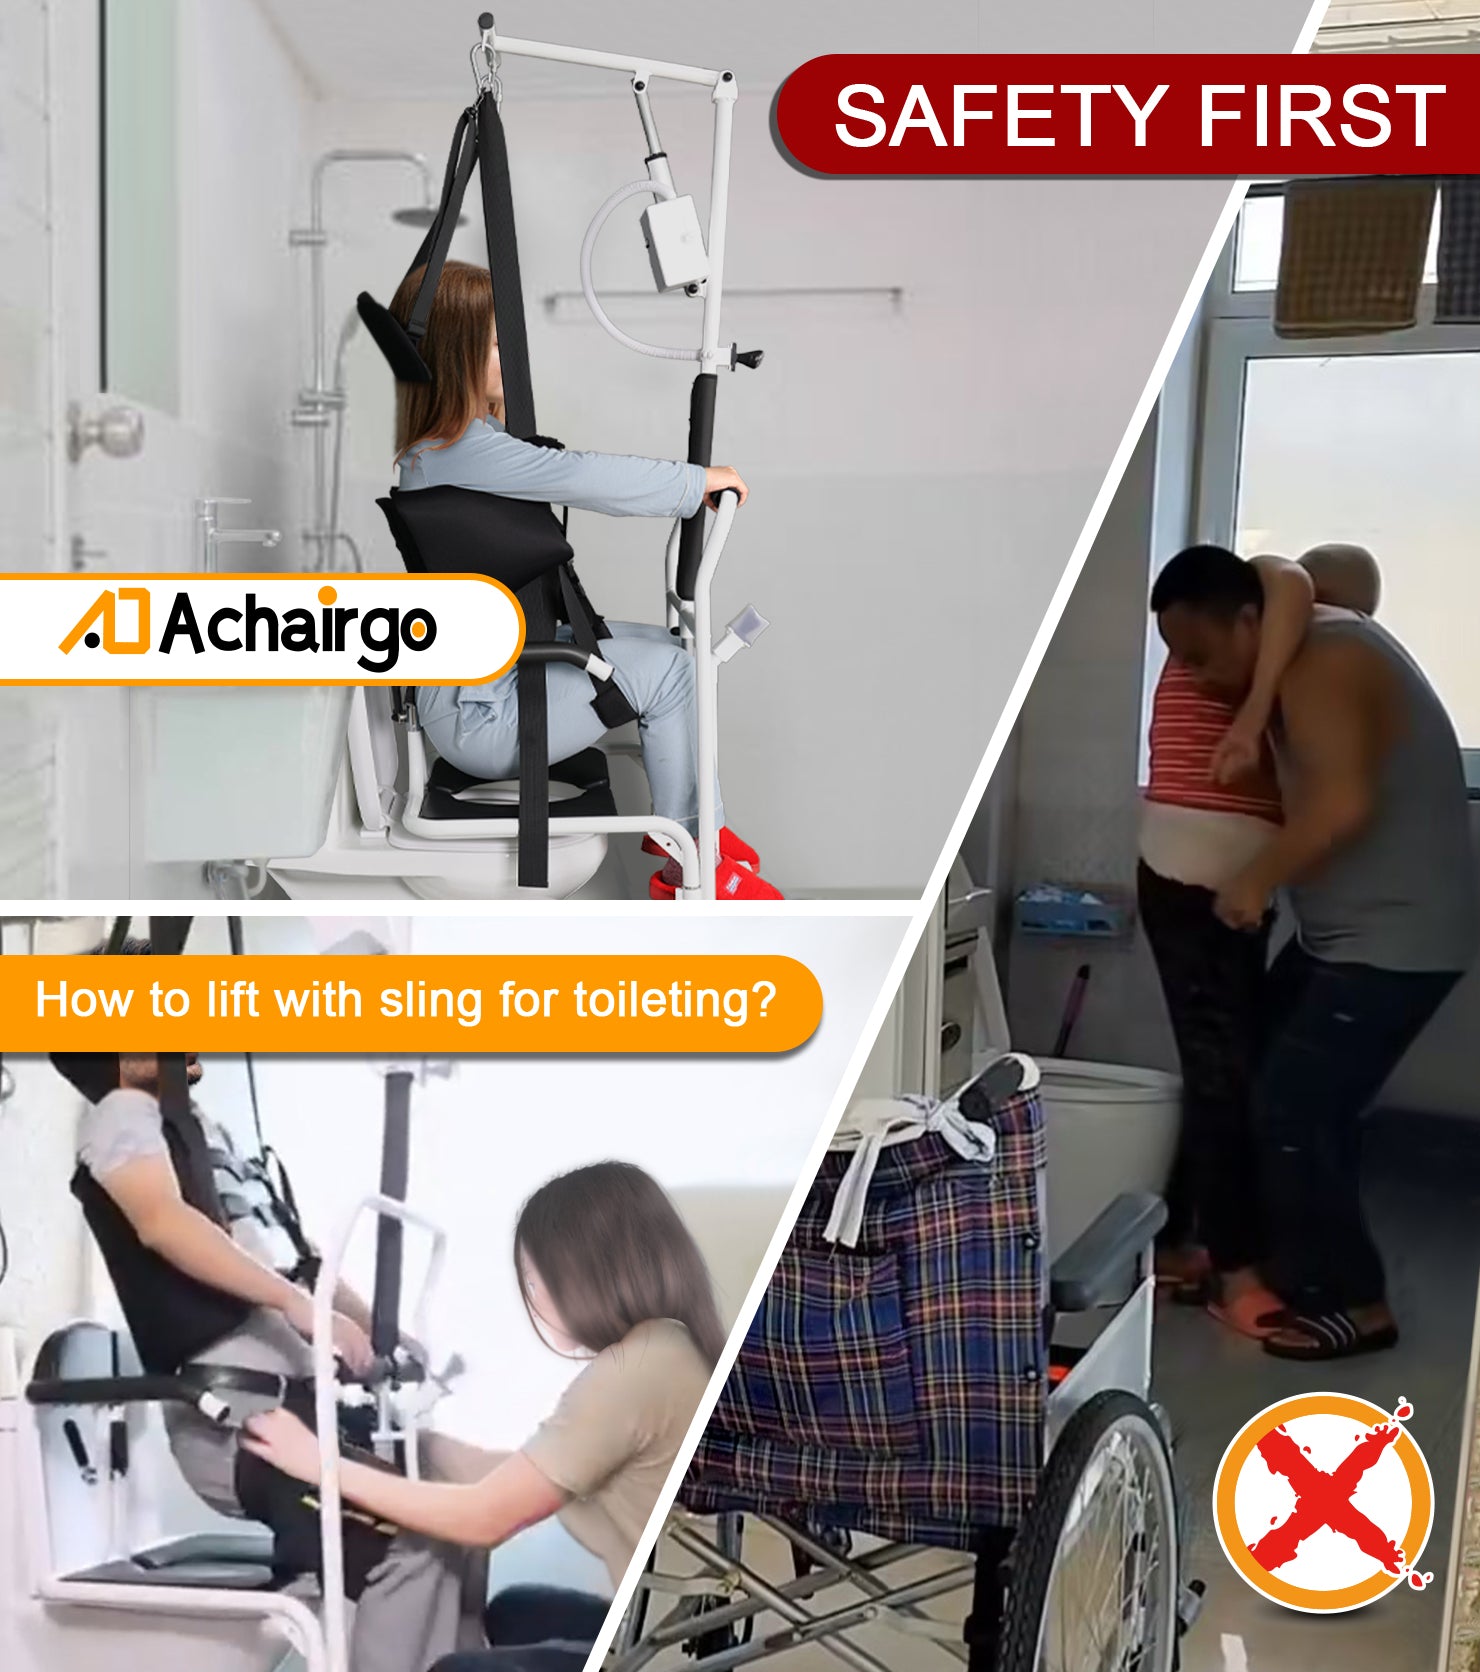 Patient Lift Technical and Safety Features